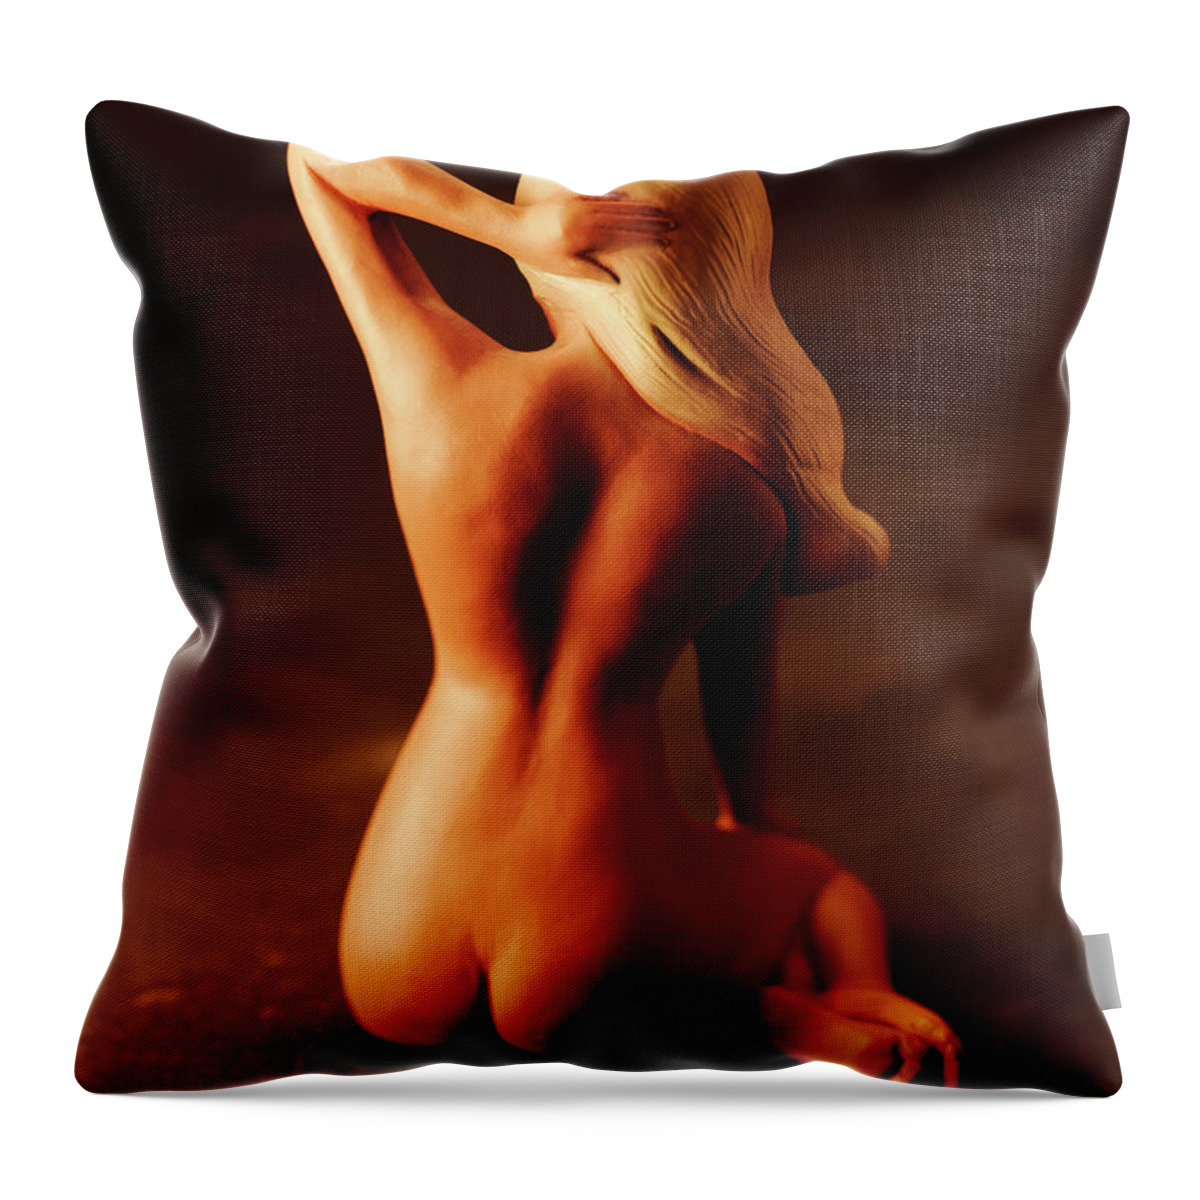 Adult Throw Pillow featuring the drawing Nude Woman From Behind #1 by CSA Images